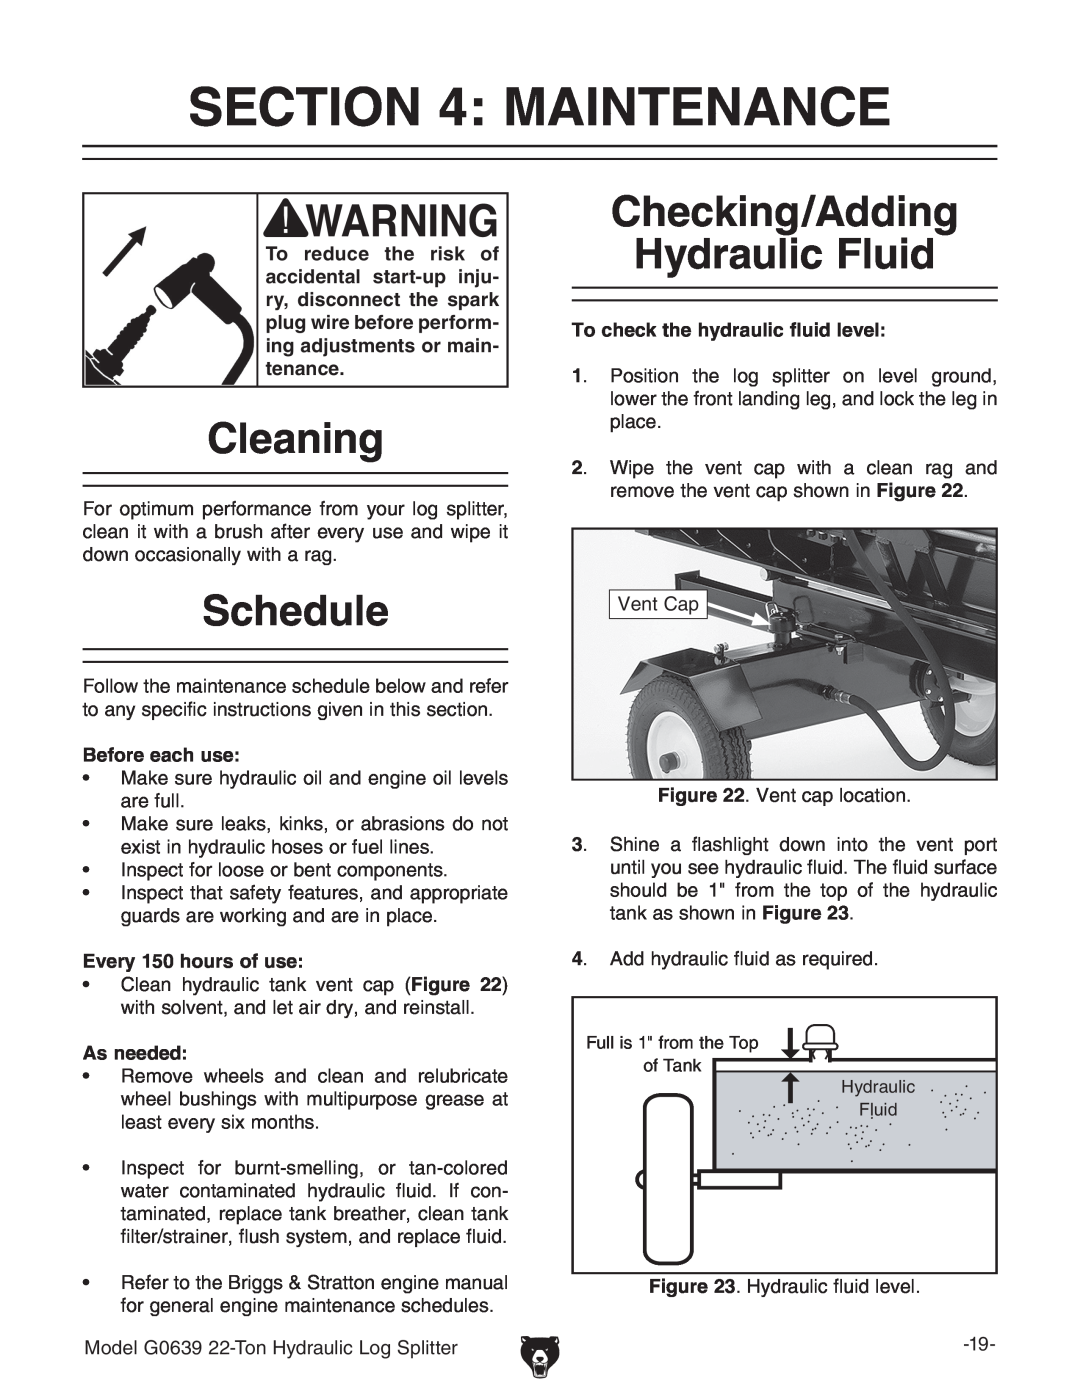 Grizzly G0639 owner manual Maintenance, Cleaning, Schedule, Checking/Adding Hydraulic Fluid 